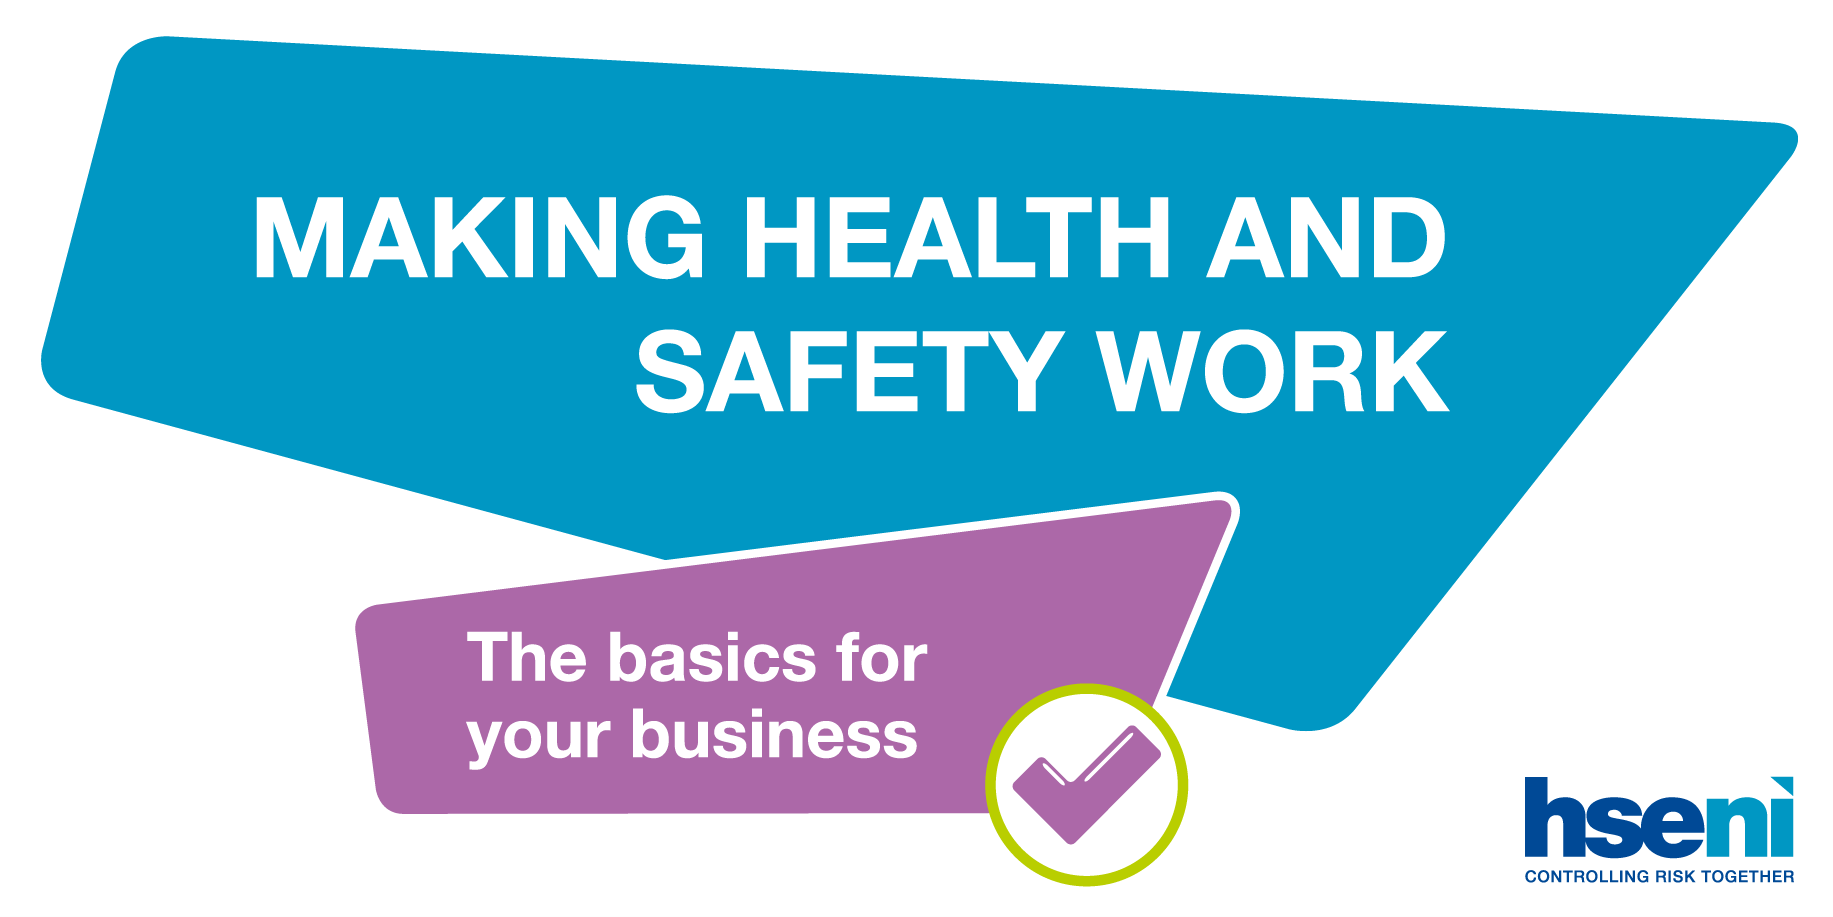 Images reads: Making health and safety work for your business